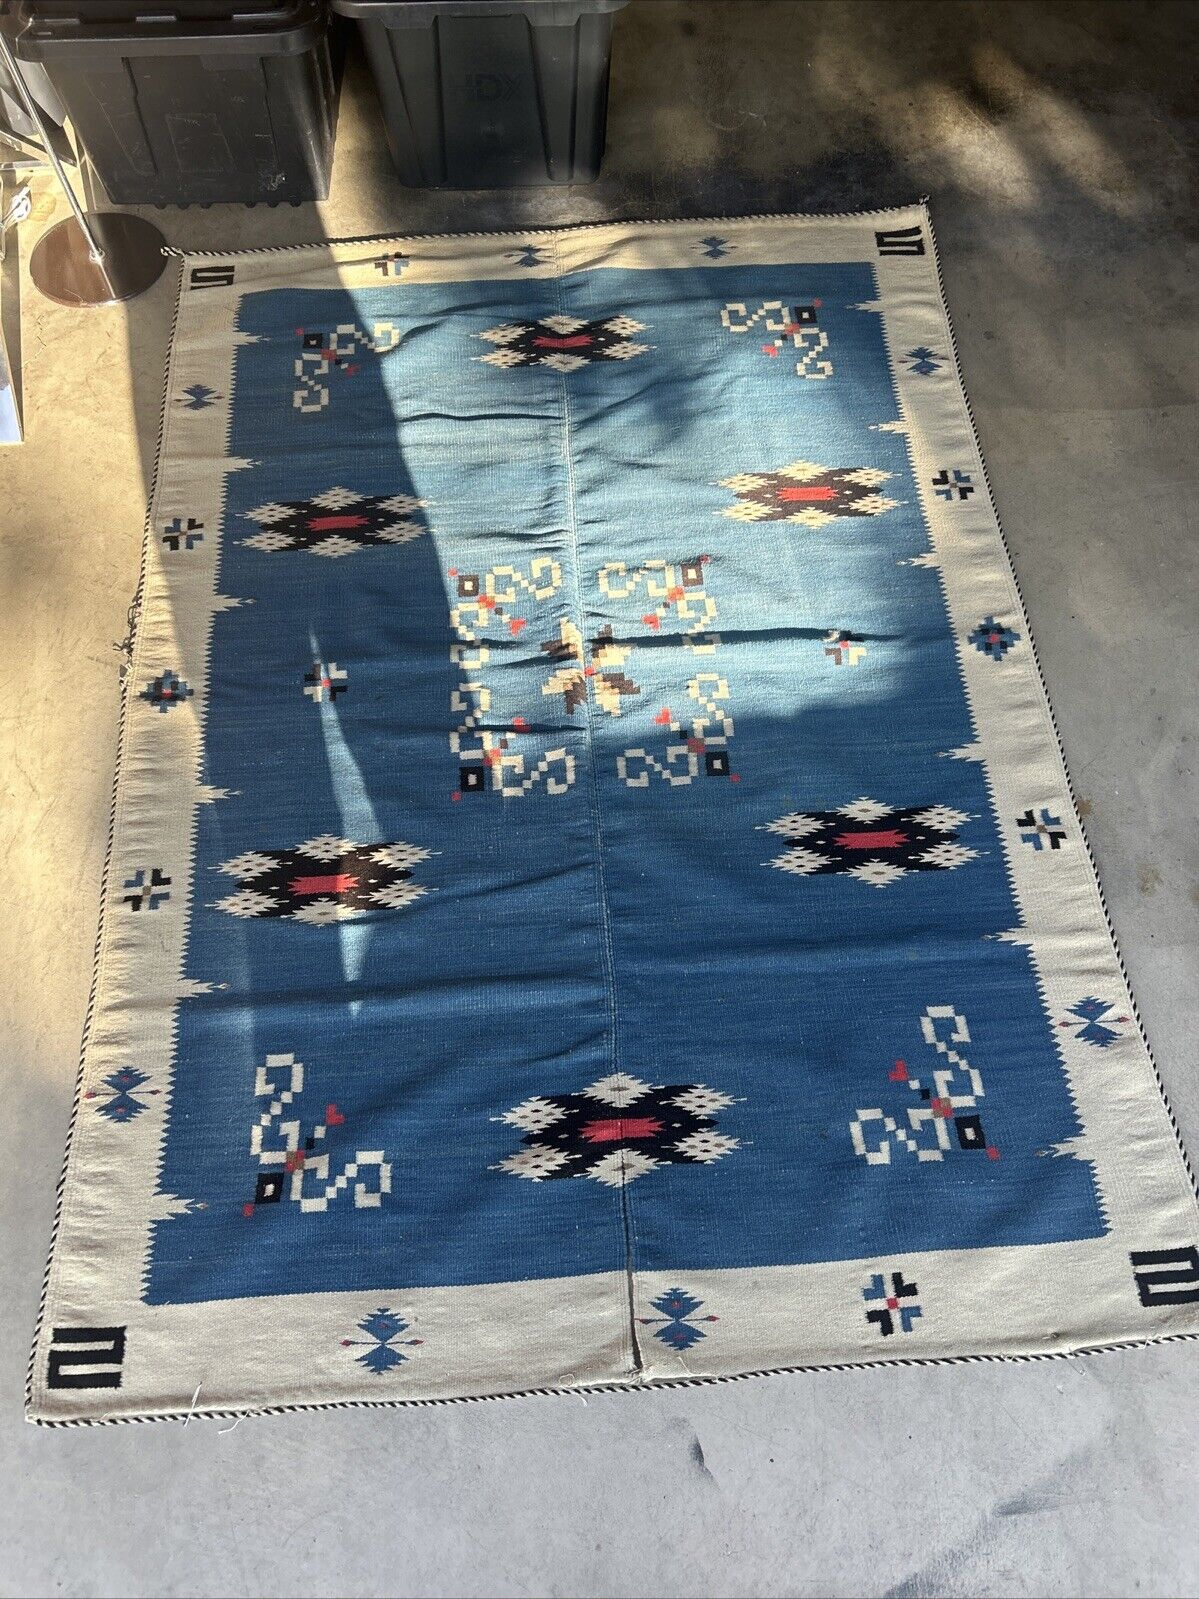 Large 74” x 52” Texcoco Blanket Rug Mexican Native American 1920s